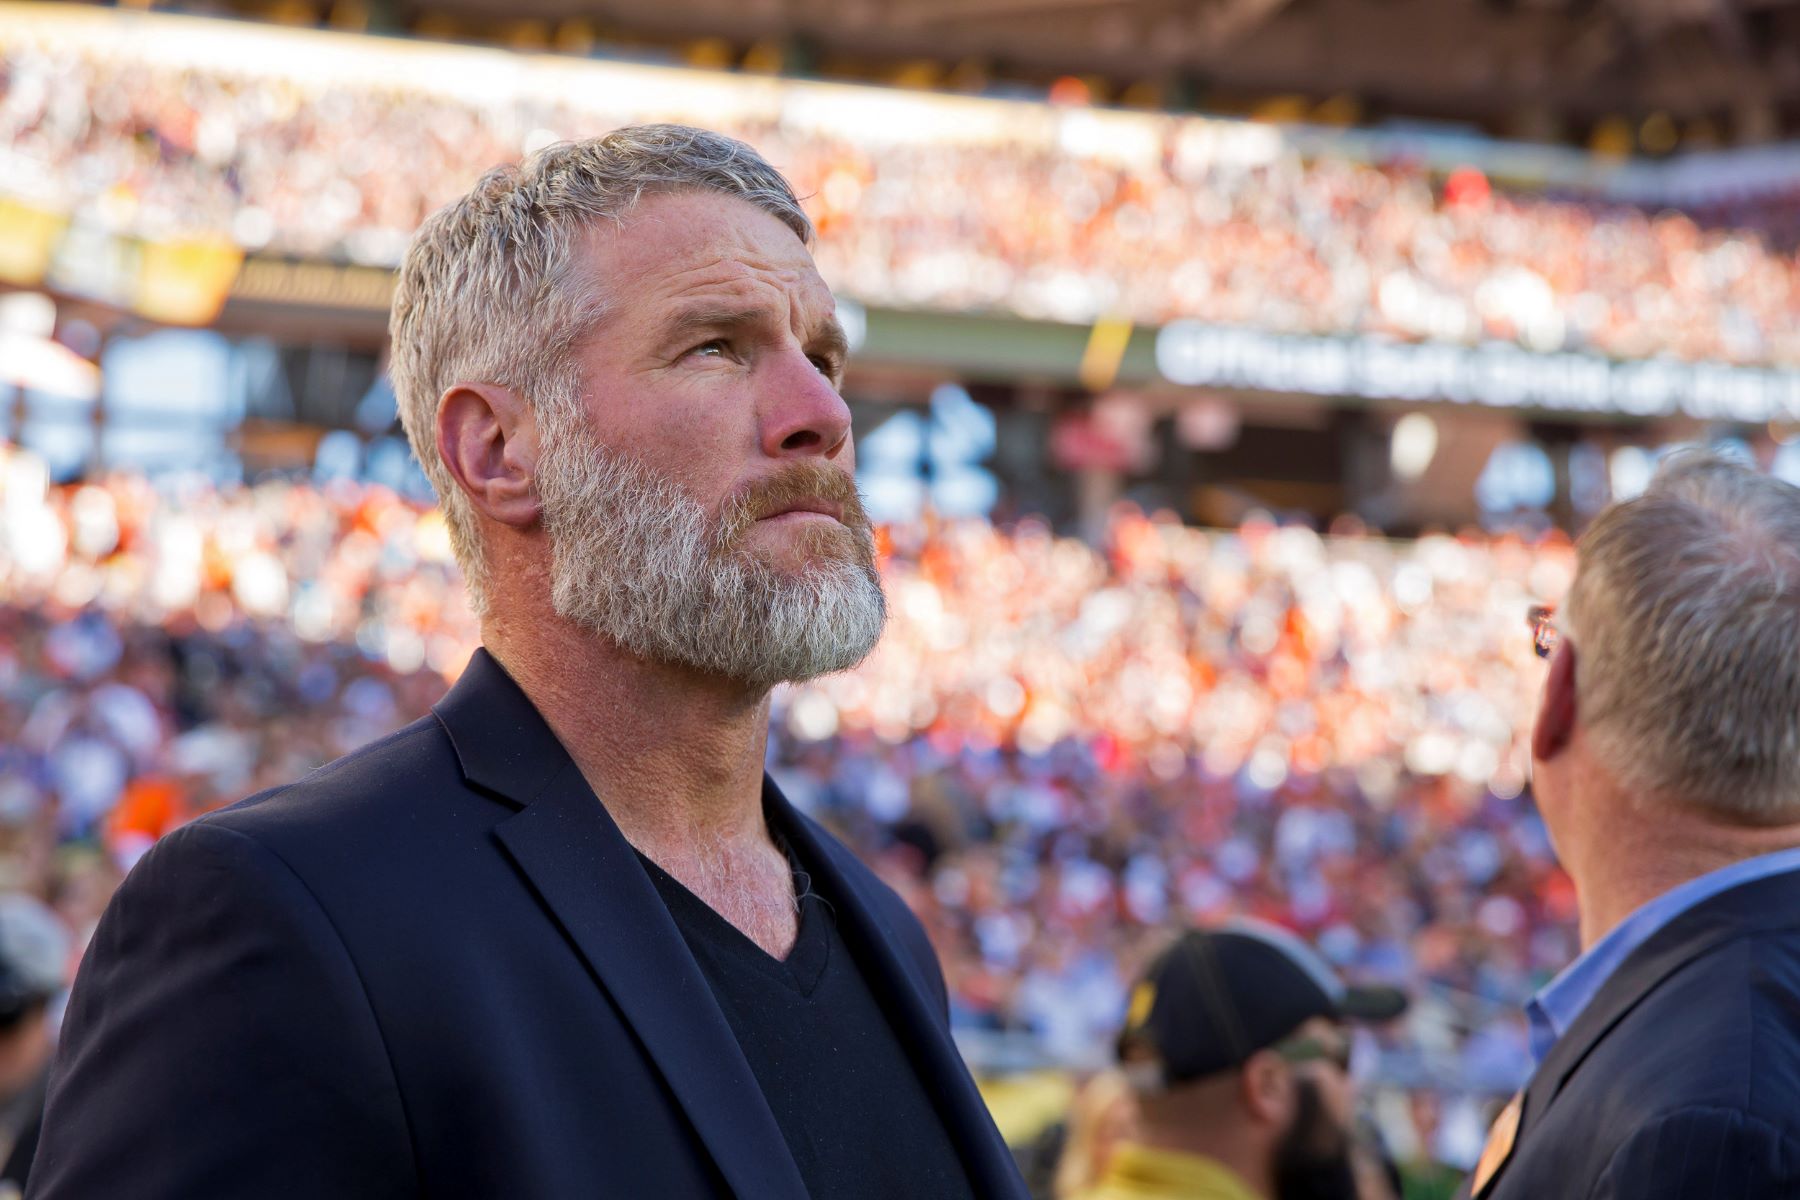 brett-favre-predicts-aaron-rodgers-will-make-a-strong-comeback-from-achilles-tear